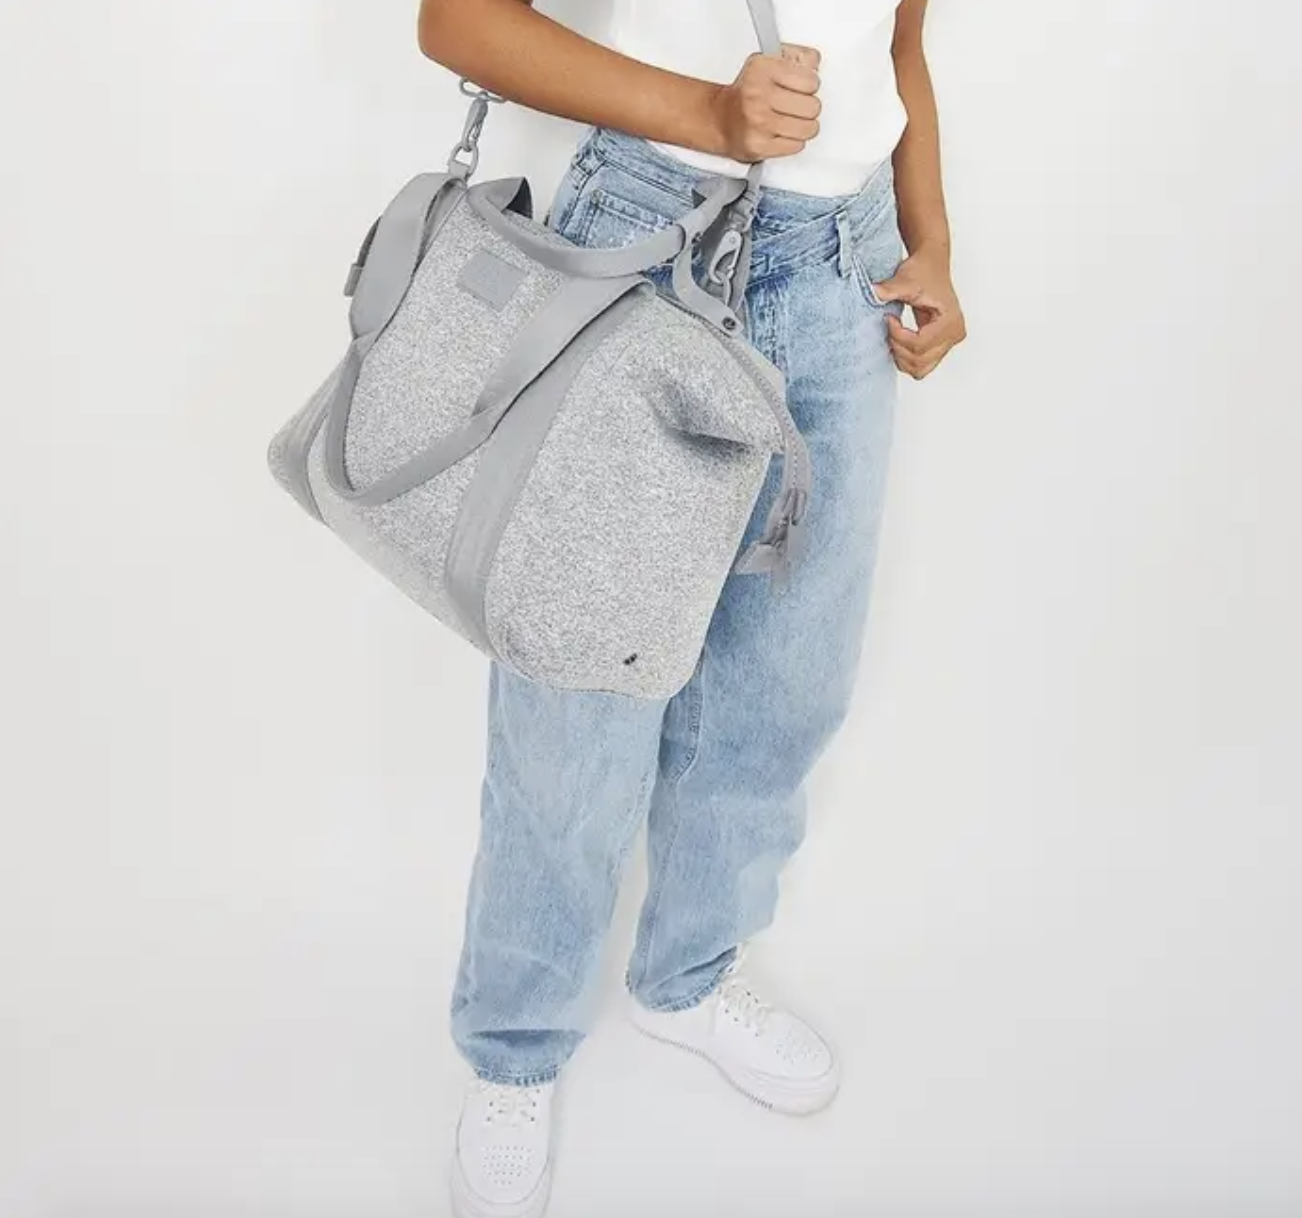 Model with the long strap of their shoulder and the square-shaped duffle in grey with shorter straps